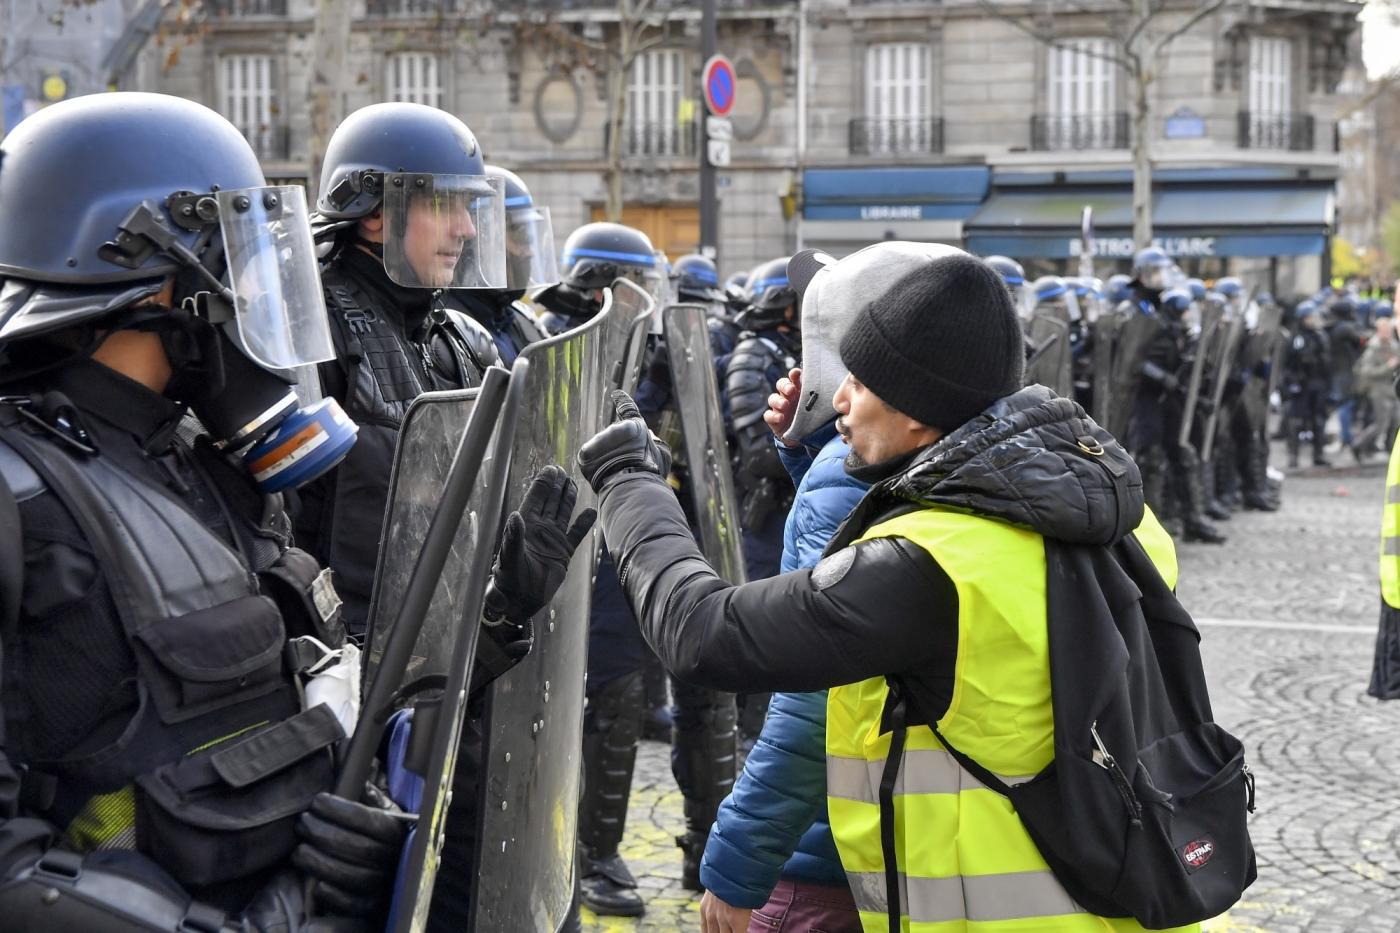 PARIS, Dec. 8, 2018 (Xinhua) -- A protester confronts police near the Arch of Triumph in Paris, France, on Dec. 8, 2018. Riot police fired tear gas and water cannon at "Yellow Vests" protesters marching in Paris on Saturday in the fourth week-end action despite President Emmanuel Macron's series of concessions. (Xinhua/Chen Yichen/IANS) by .